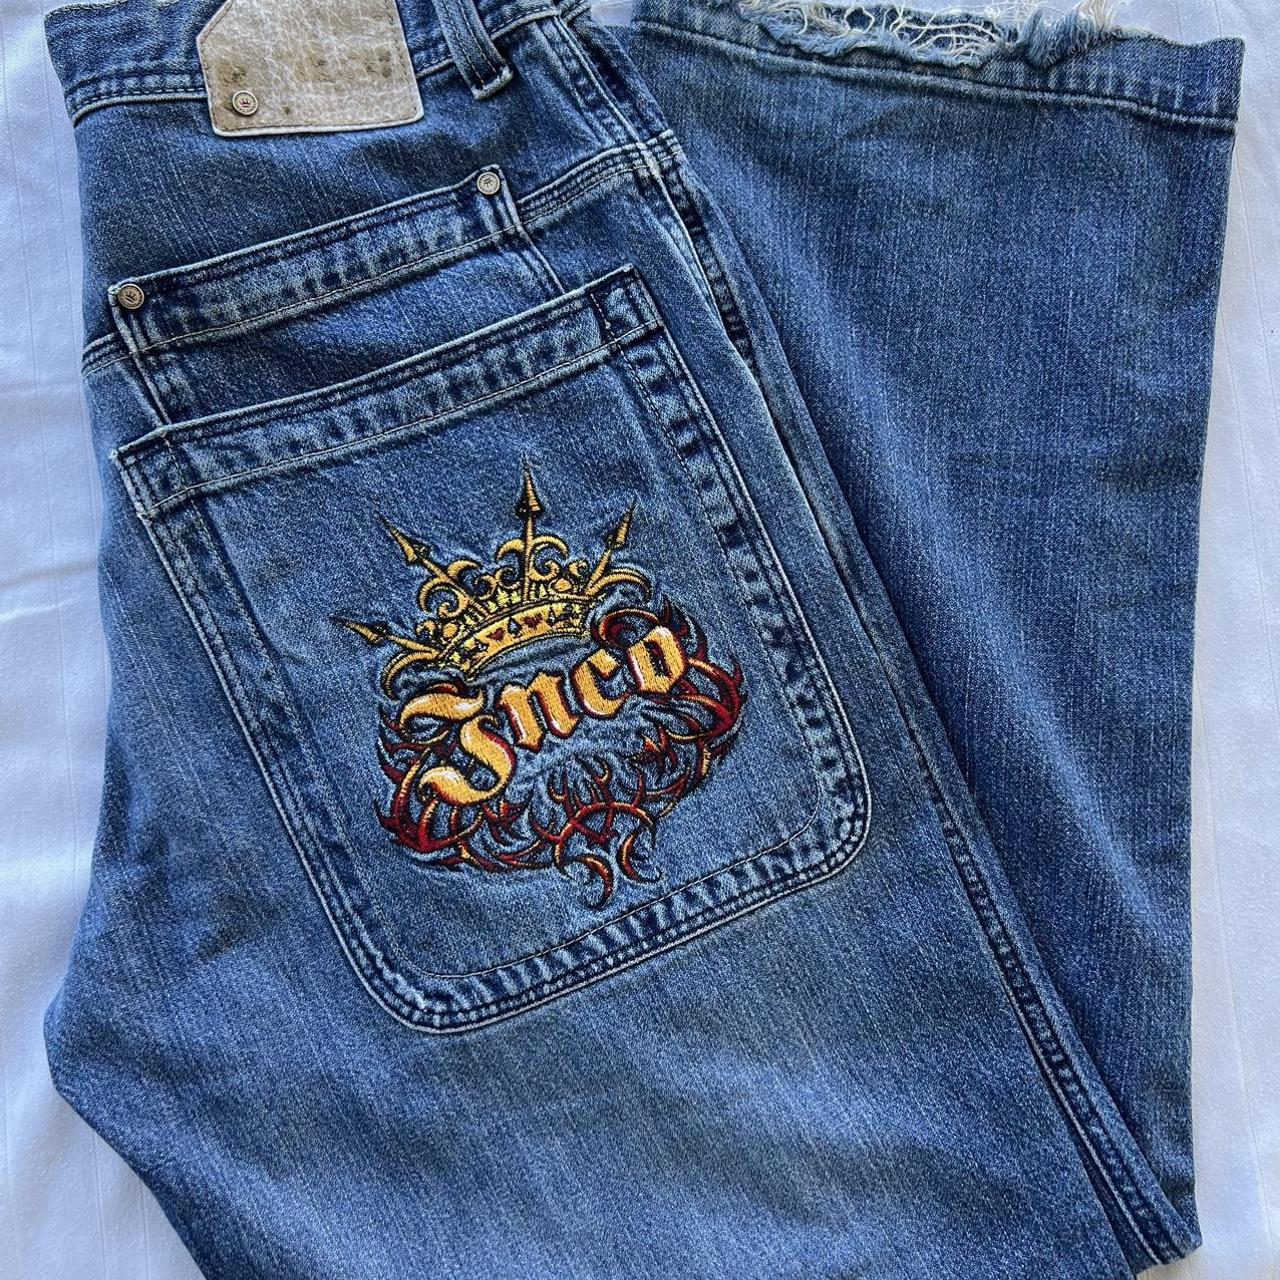 JNCO Wire Crown Jeans Size 33x32 DM BEFORE BUYING... - Depop